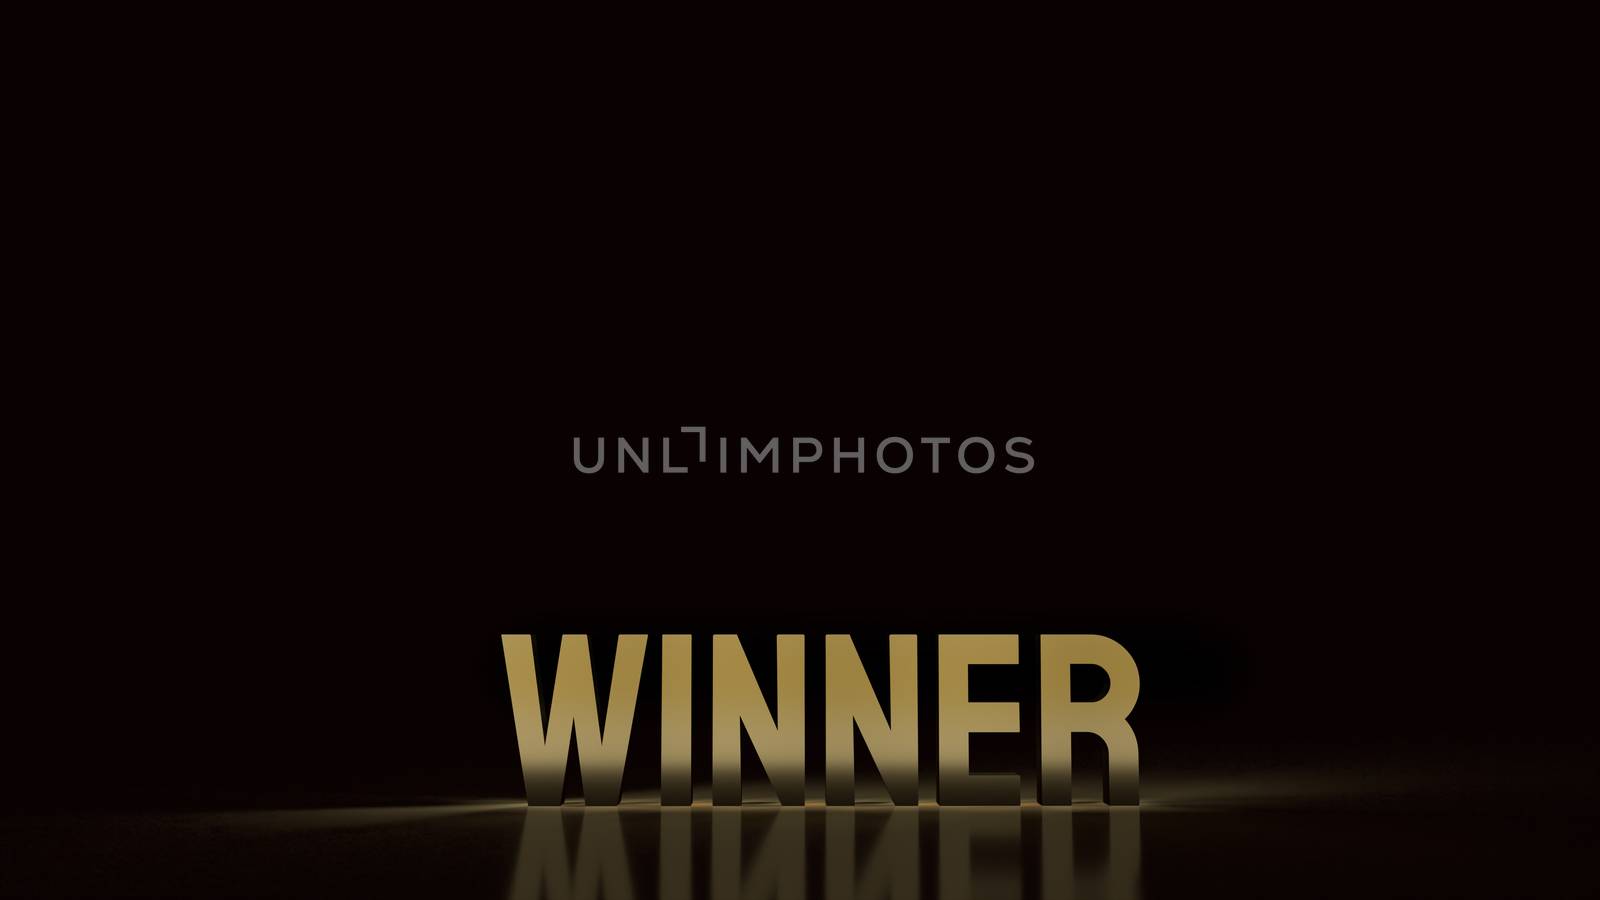 winner text gold surface in black background 3d rendering.
 by Niphon_13